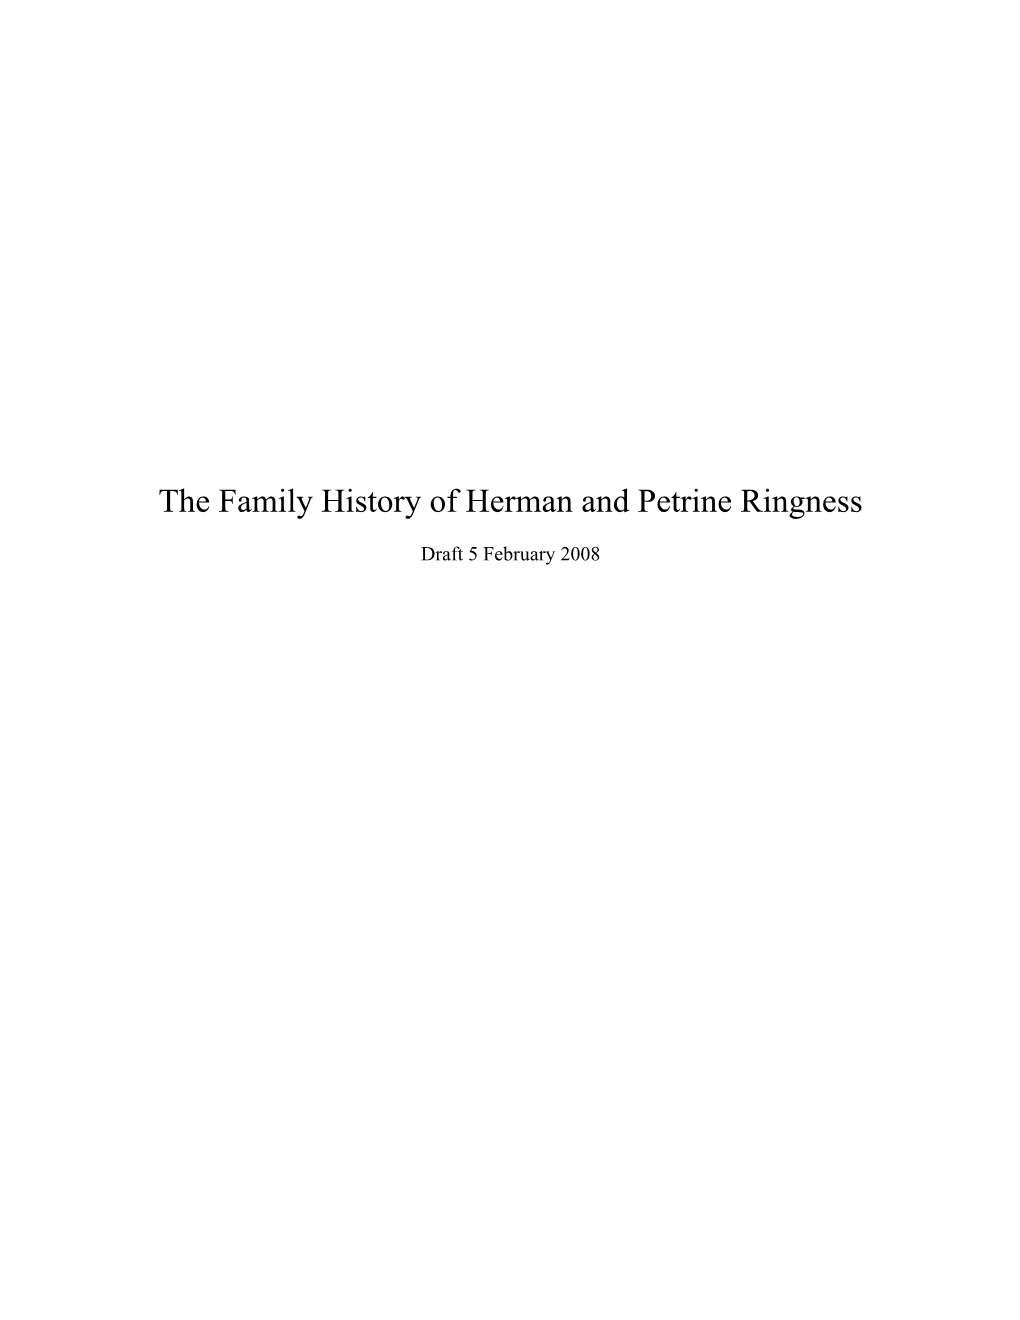 The Family History of Herman and Petrine Ringness